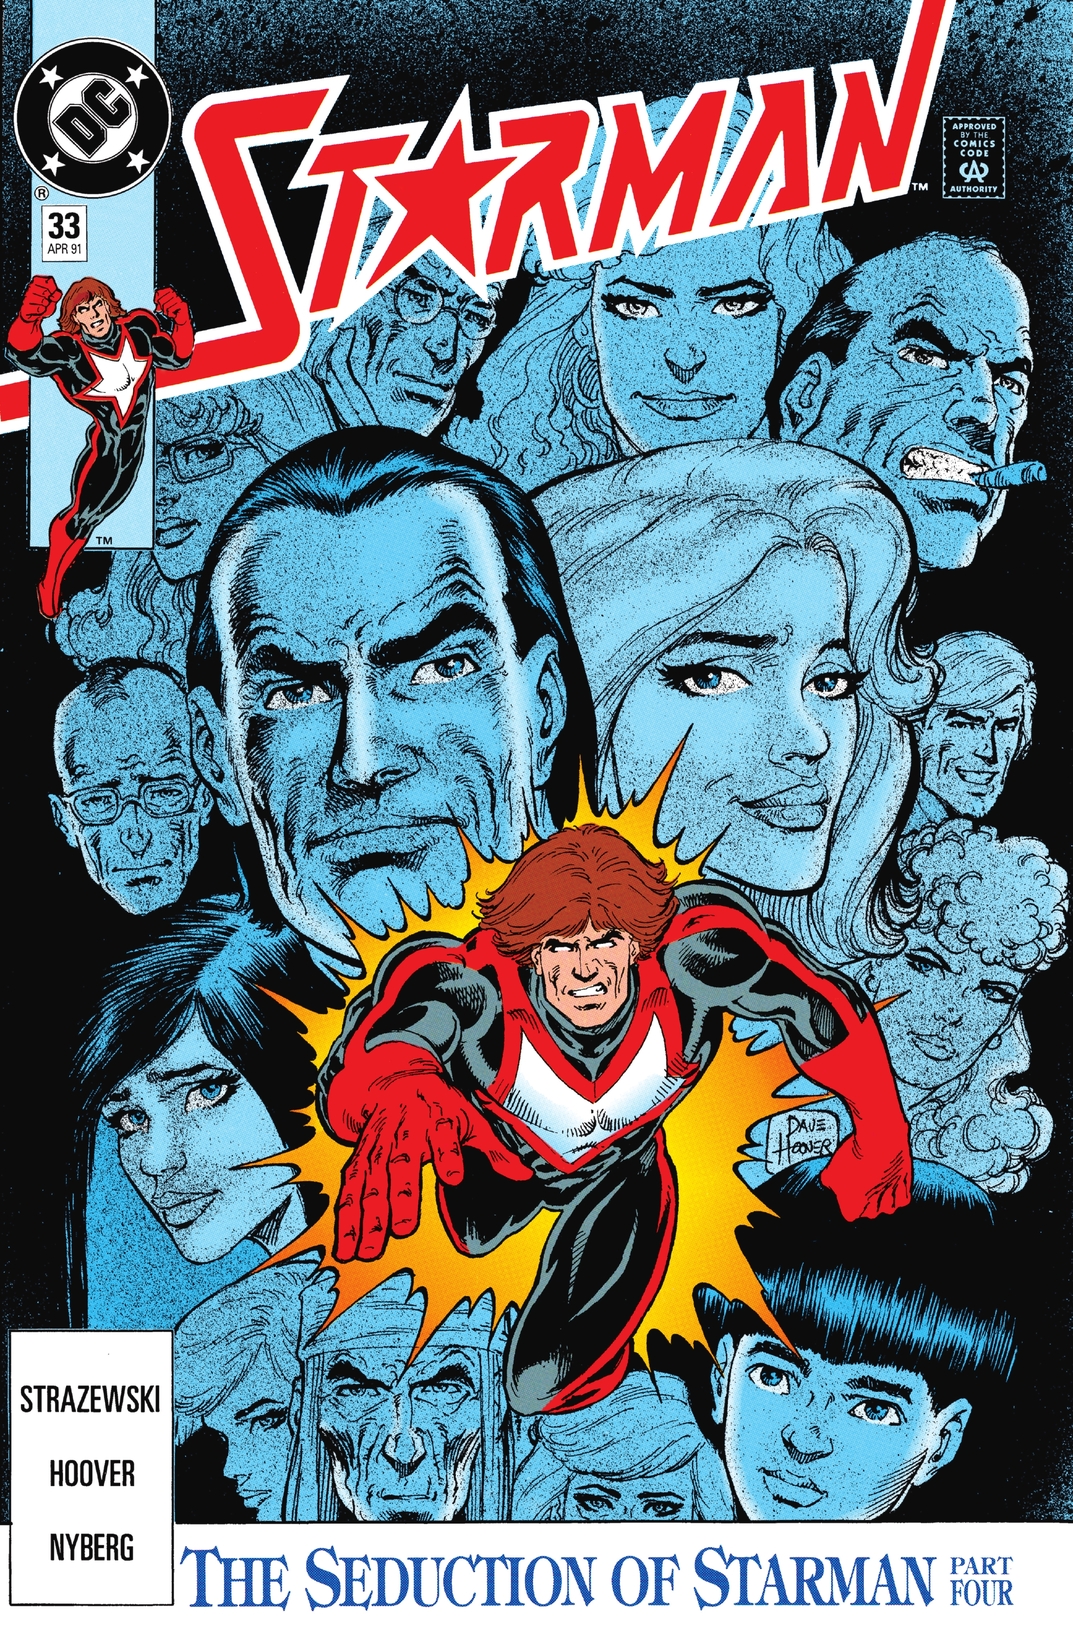 Starman (1988-) #33 preview images